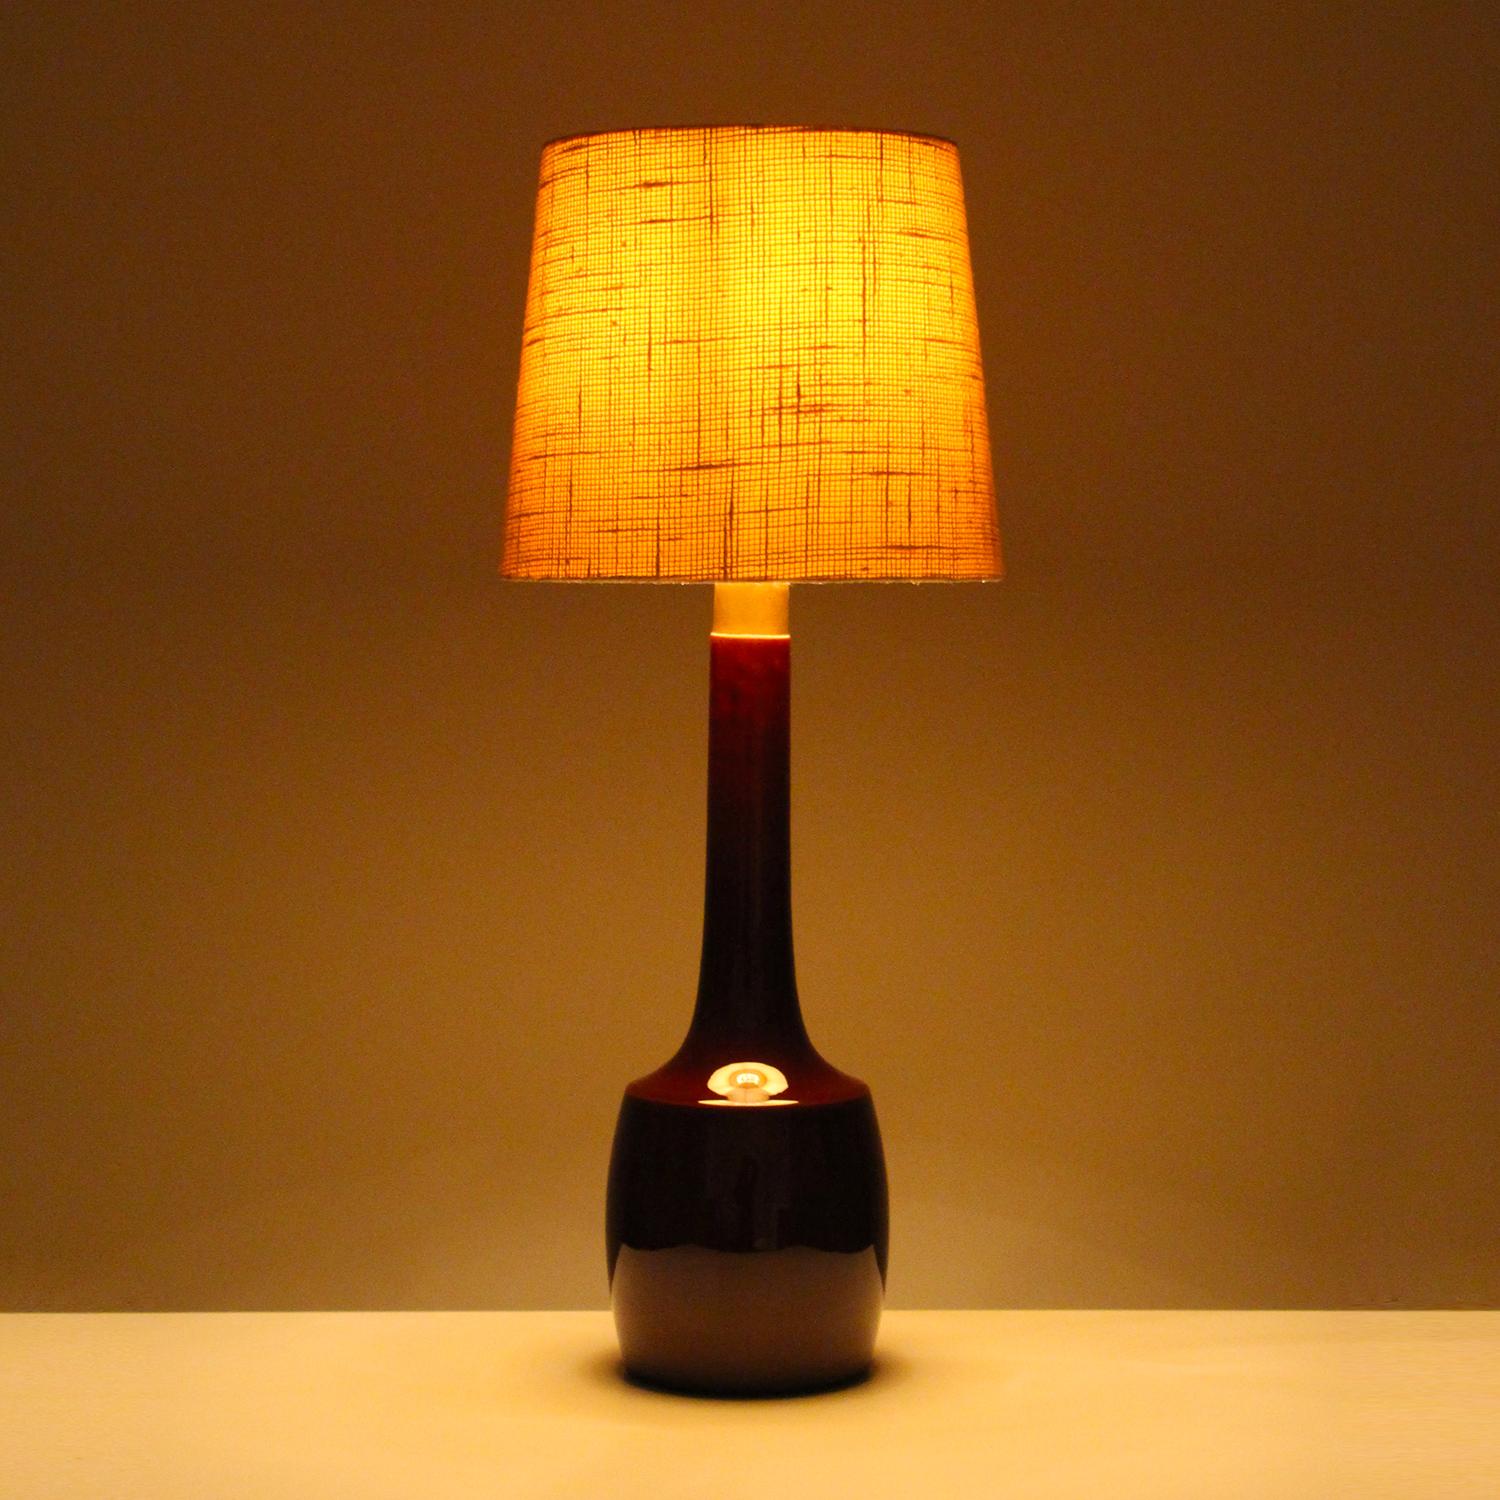 Tall table light by unspecified designer for Knabstrup Keramik in the 1960s - absolutely gorgeous burgundy ceramic lamp stand with vintage shade included, all in excellent vintage condition.

A beautiful tall ceramic lamp-stand with a short